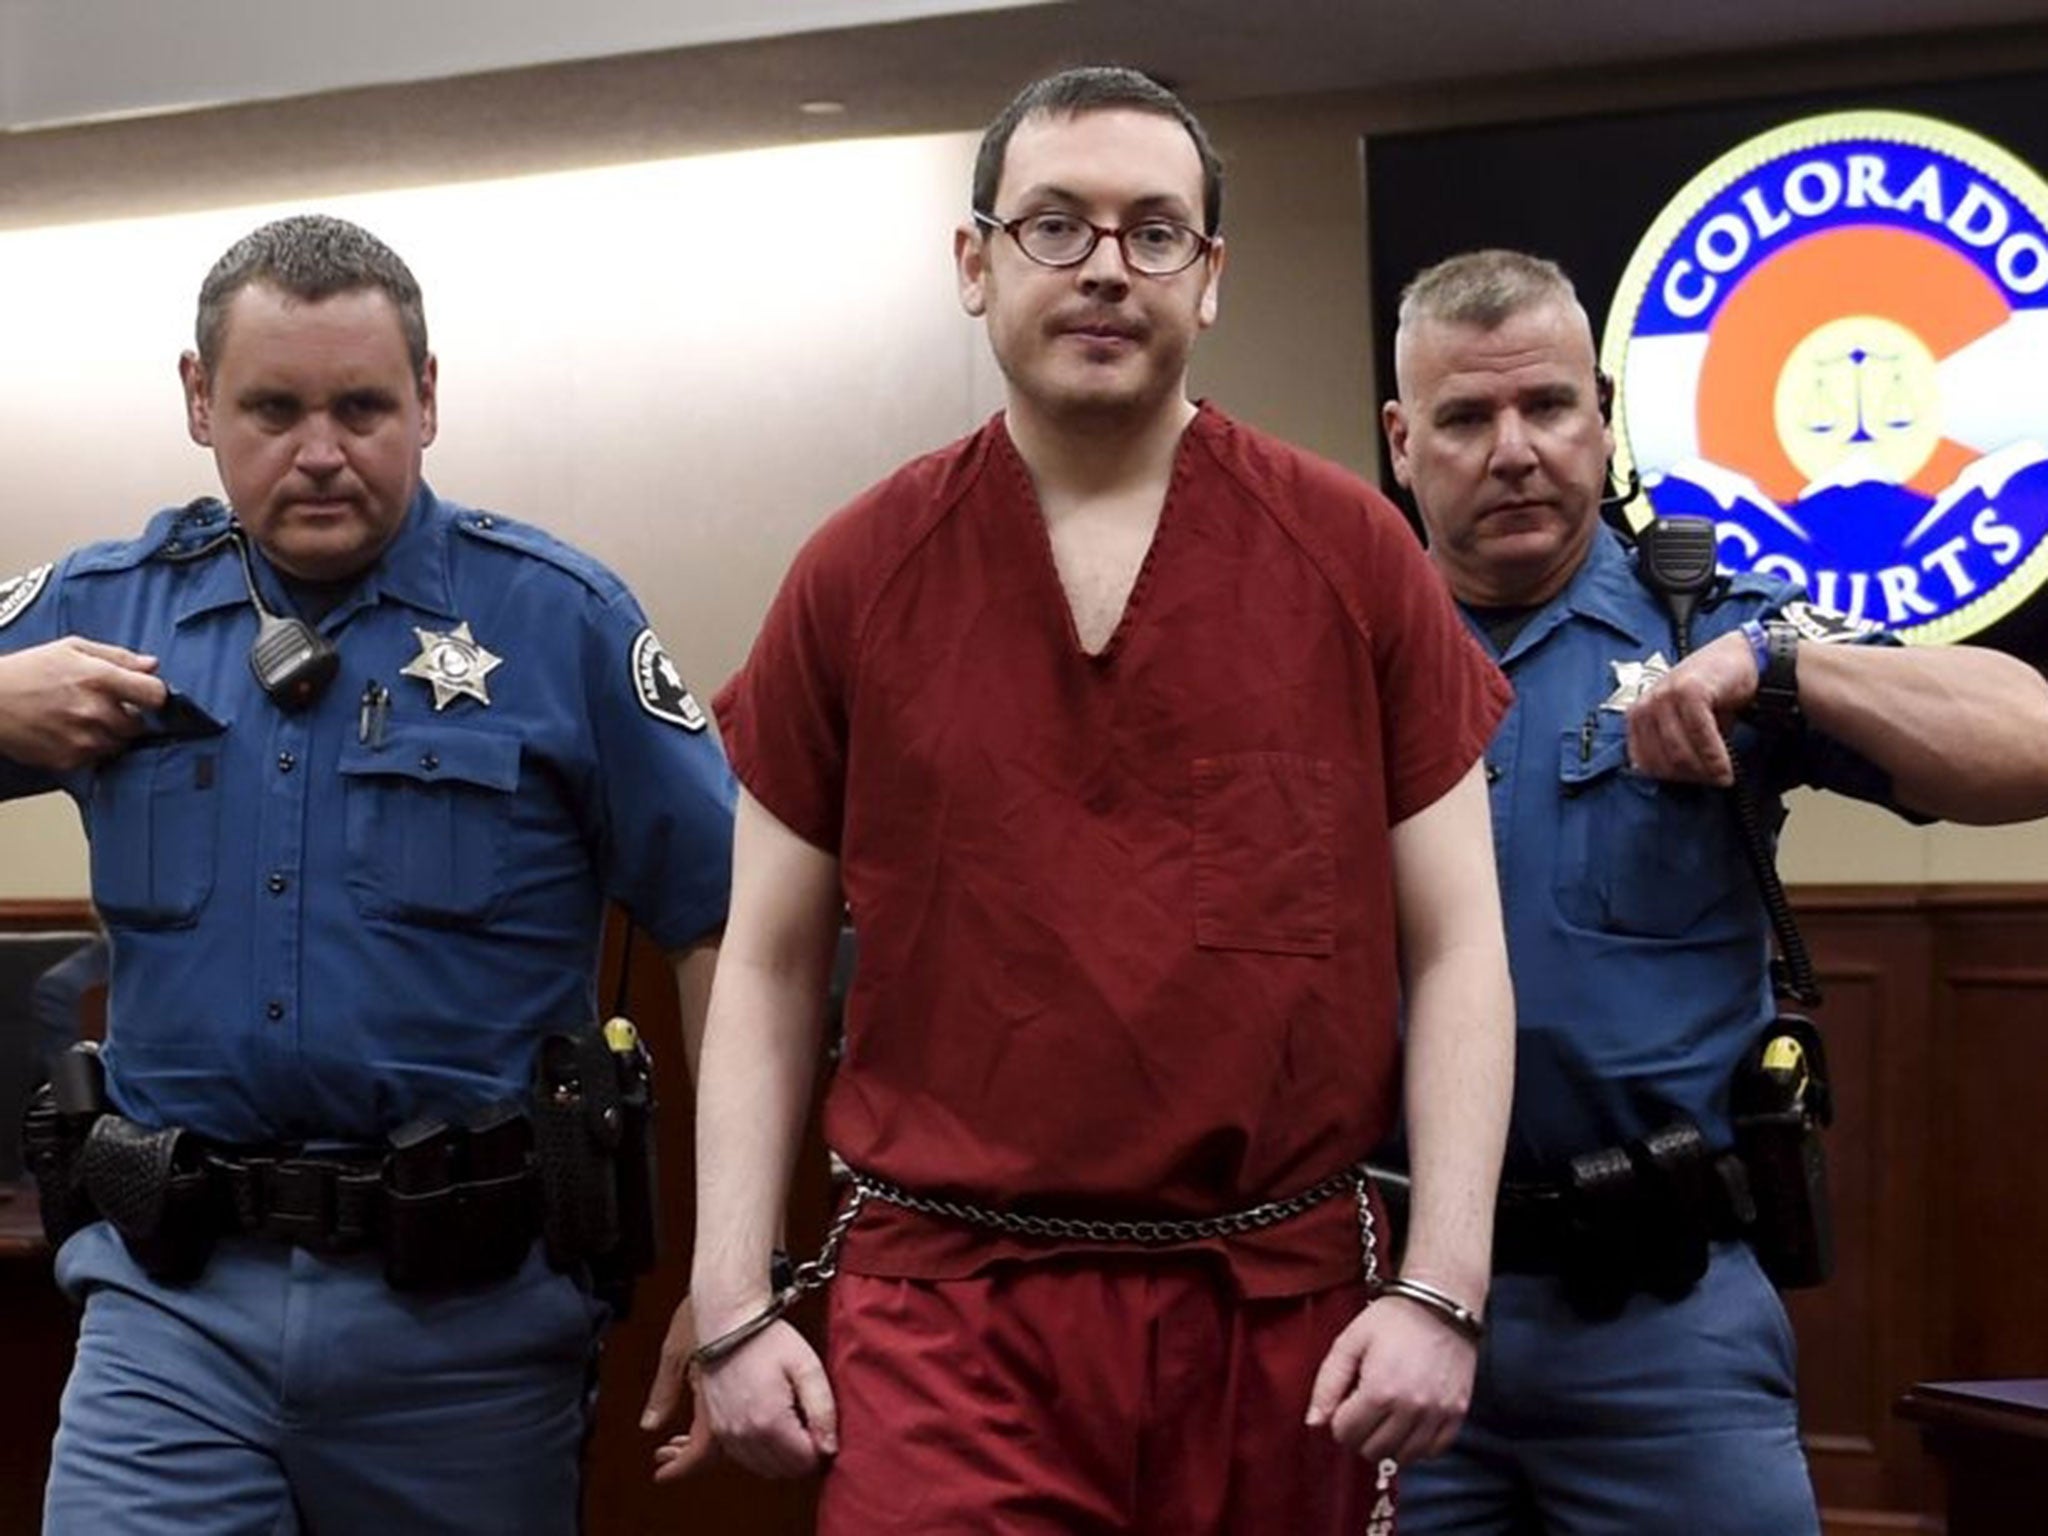 James Holmes killed 12 people and injured 70 when he opened fire in a cinema